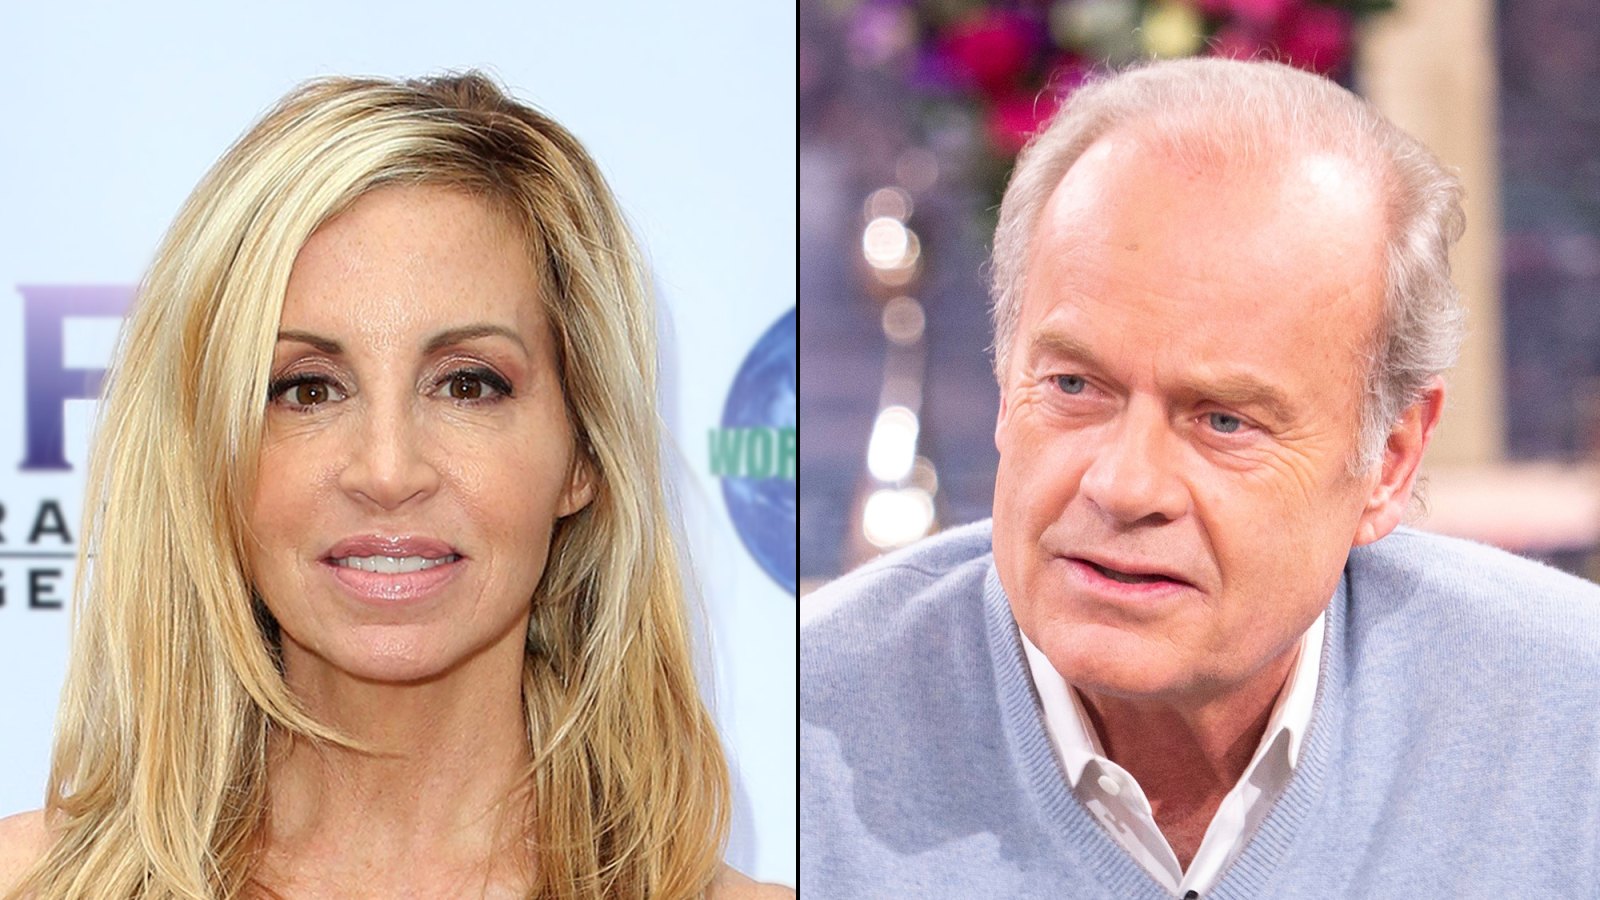 Camille Grammer Accuses Ex-Husband Kelsey Grammer of ‘Rewriting History'